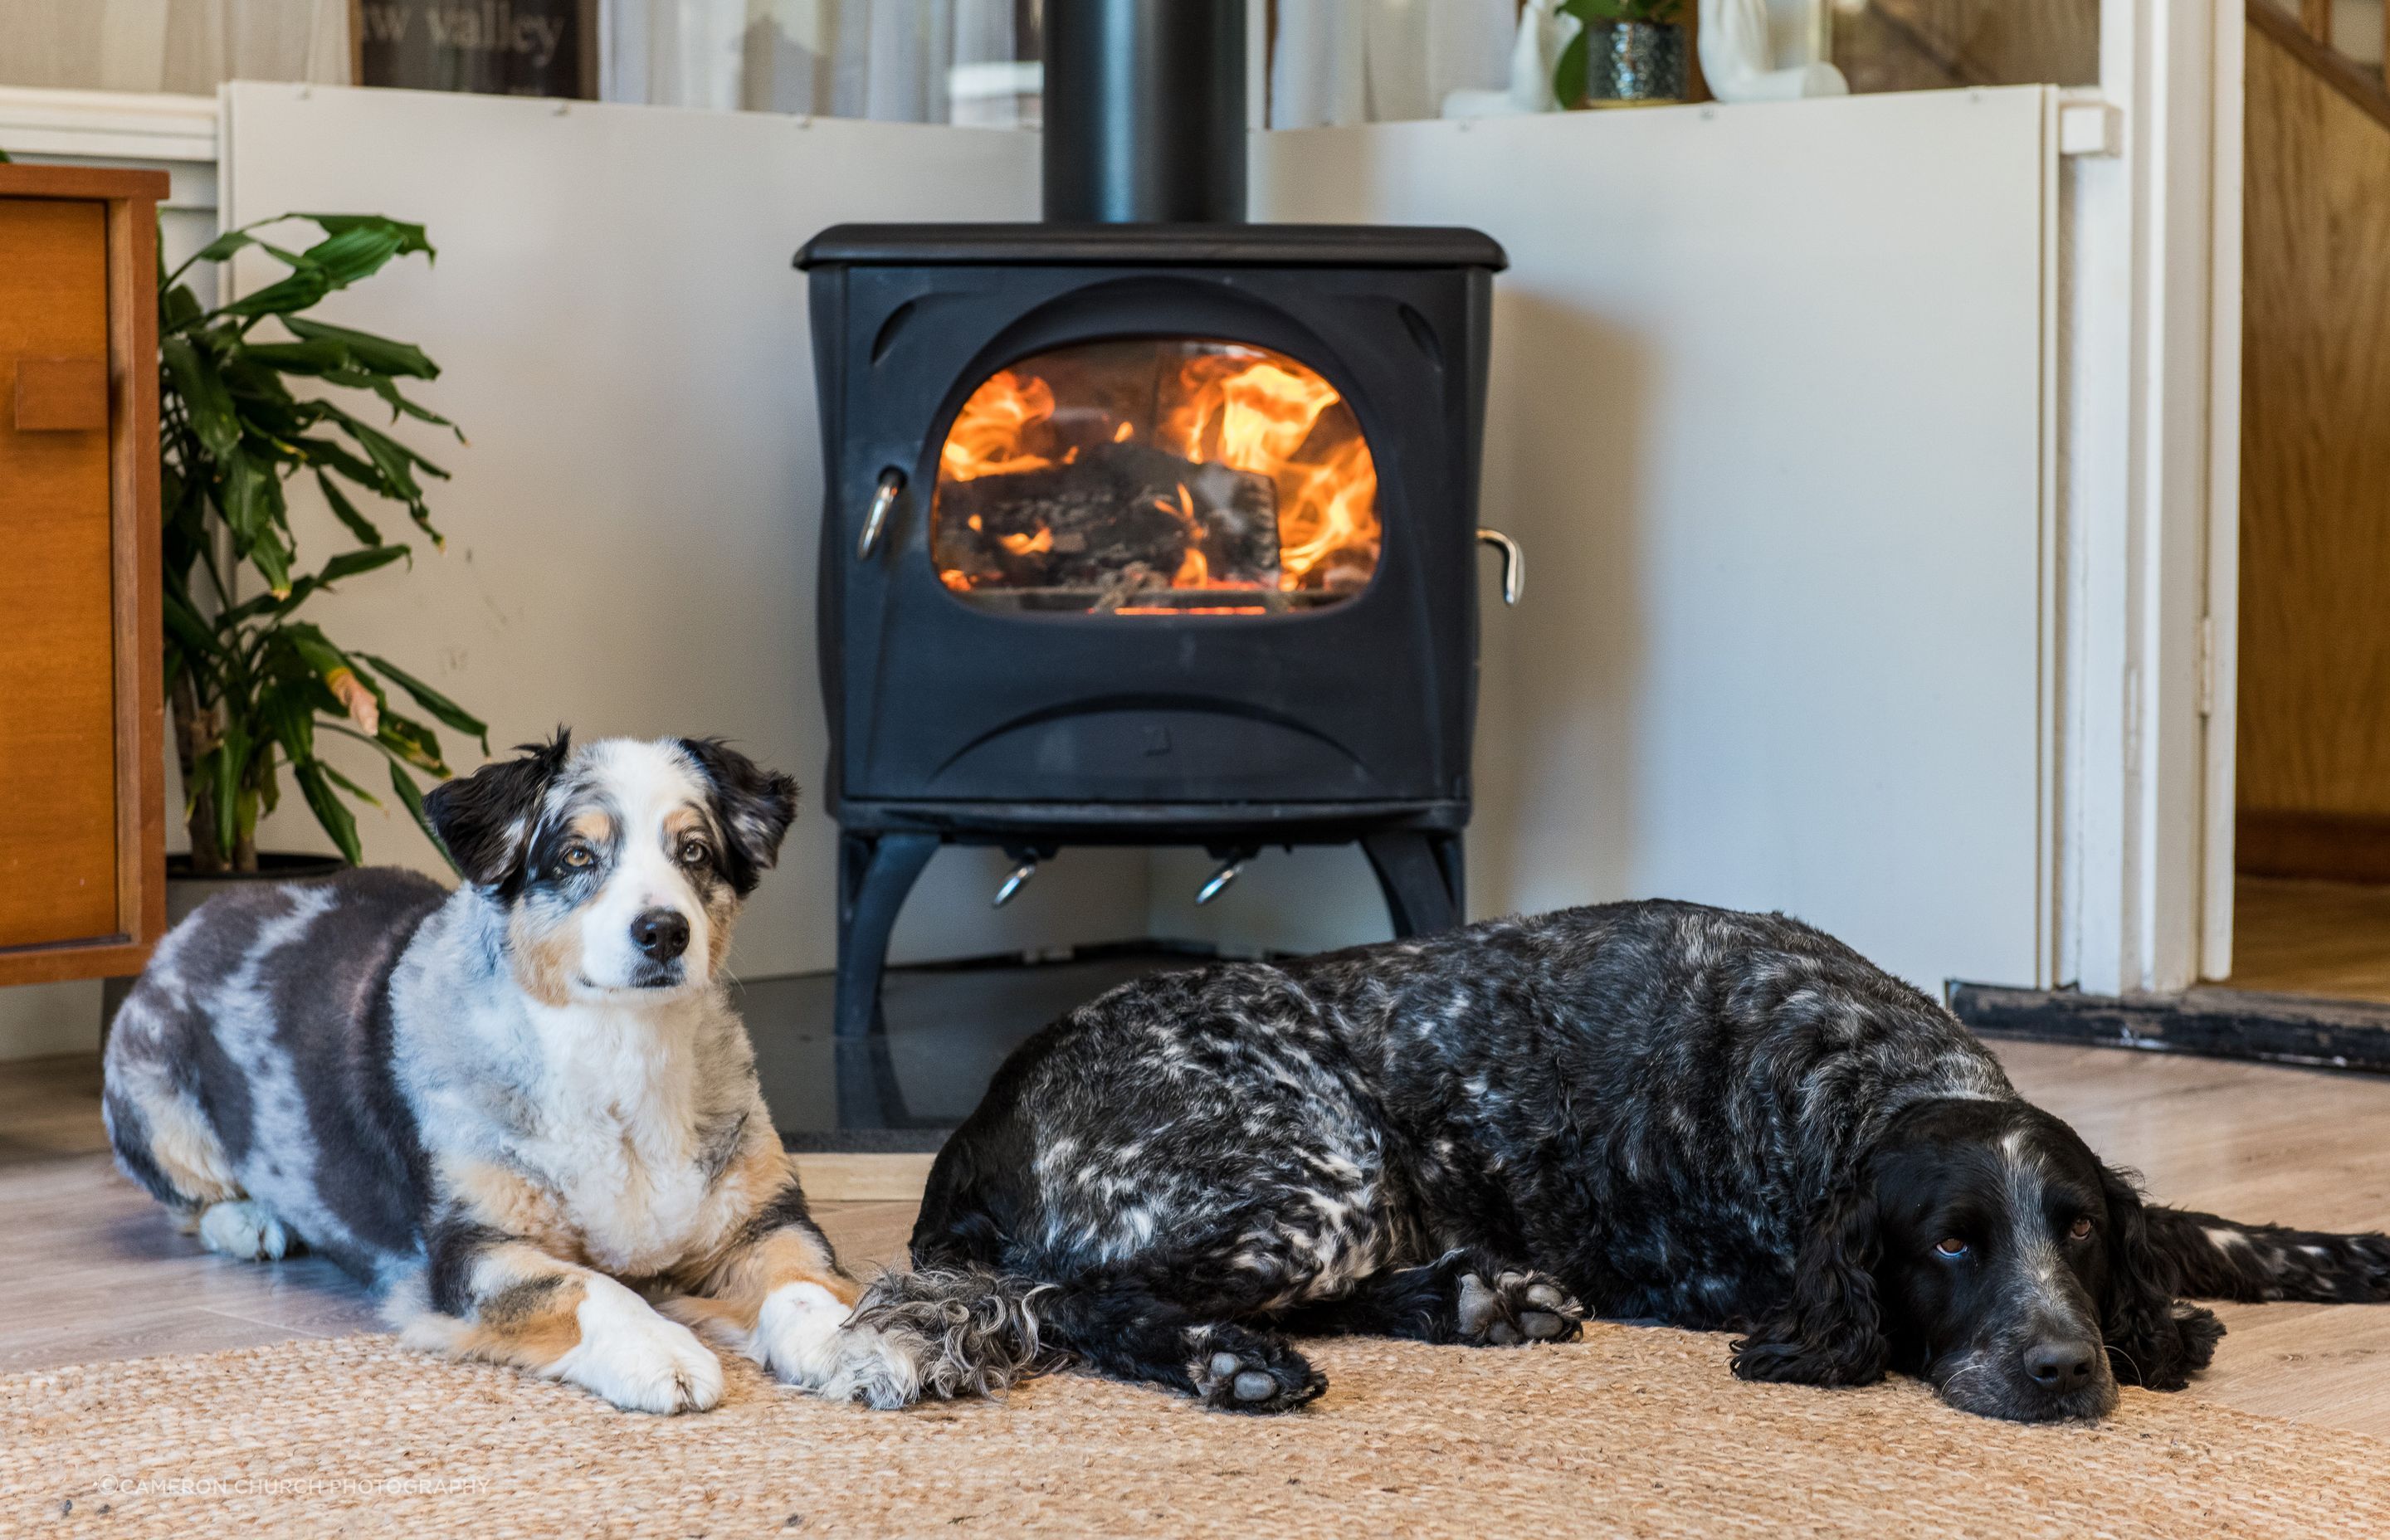 Fireside Bliss: Enjoy the warmth and charm of the Seguin Aurore Cast Iron Fireplace at Fishermans' Cottage, where two loyal companions bask in cozy comfort